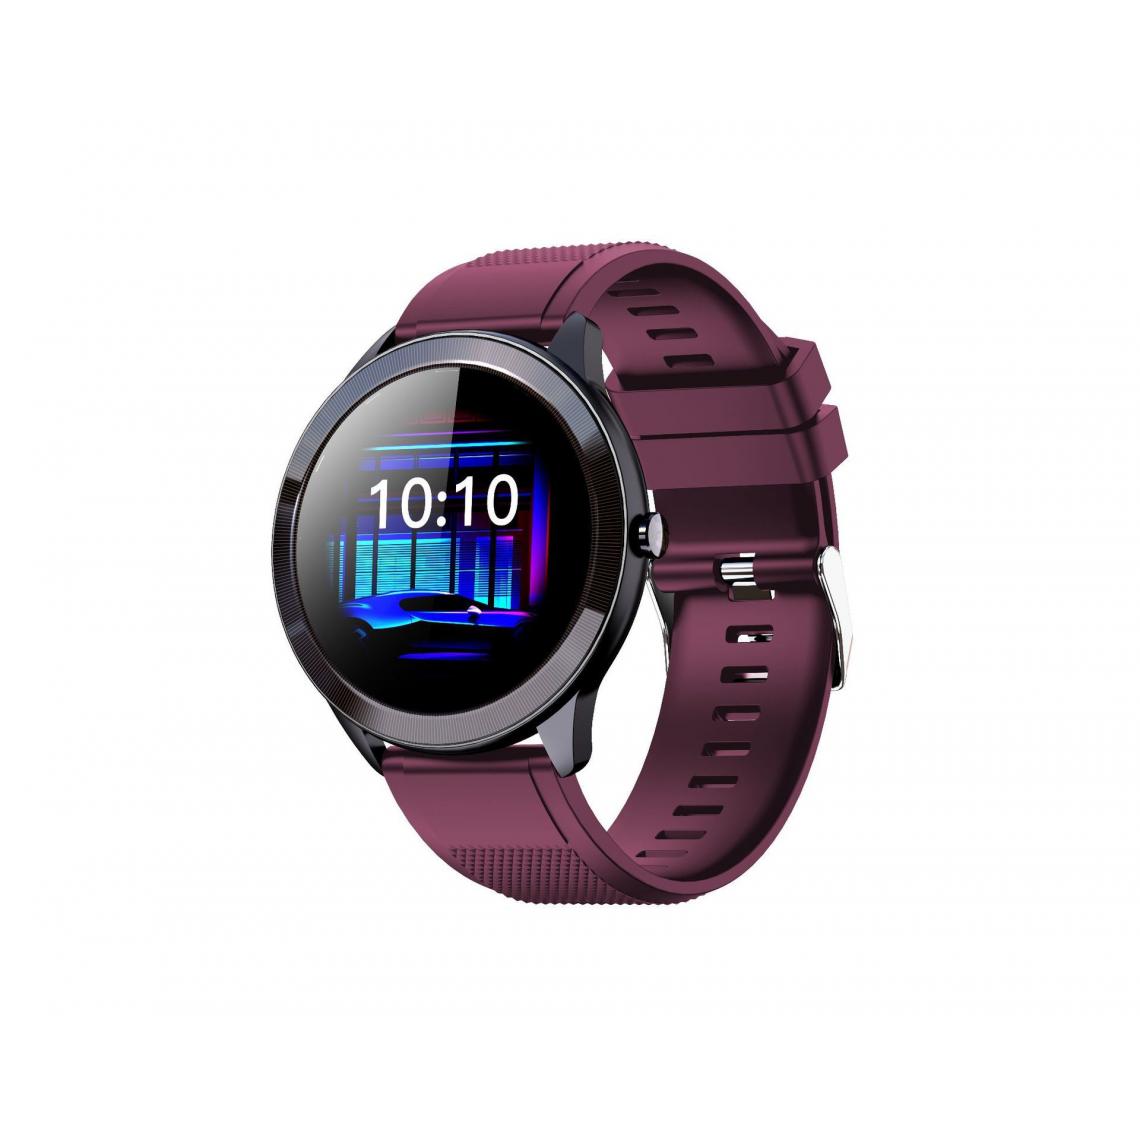 Chronotech Montres - Chronus SN93 Smart Watch Men Women IP68 Waterproof Heart Rate Monitor Fitness Tracker Bluetooth Smartwatch for Android IOS(Purple) - Montre connectée